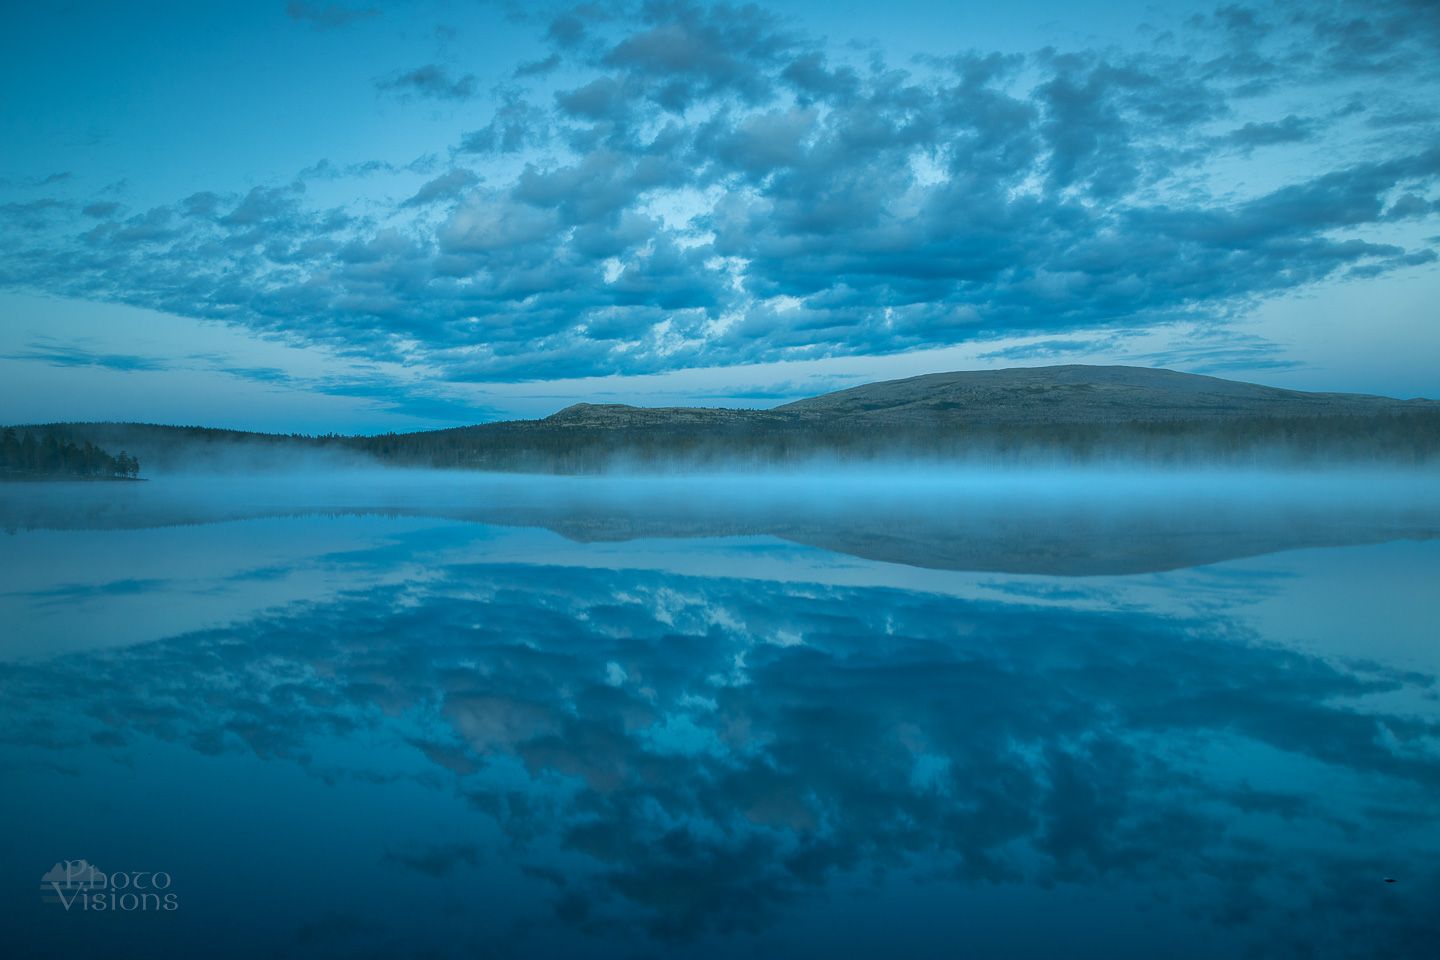 norway,woodland,lake,lakshore,mountains,clouds,blue hour,woods,forest,boreal,night,reflections, Photo Visions